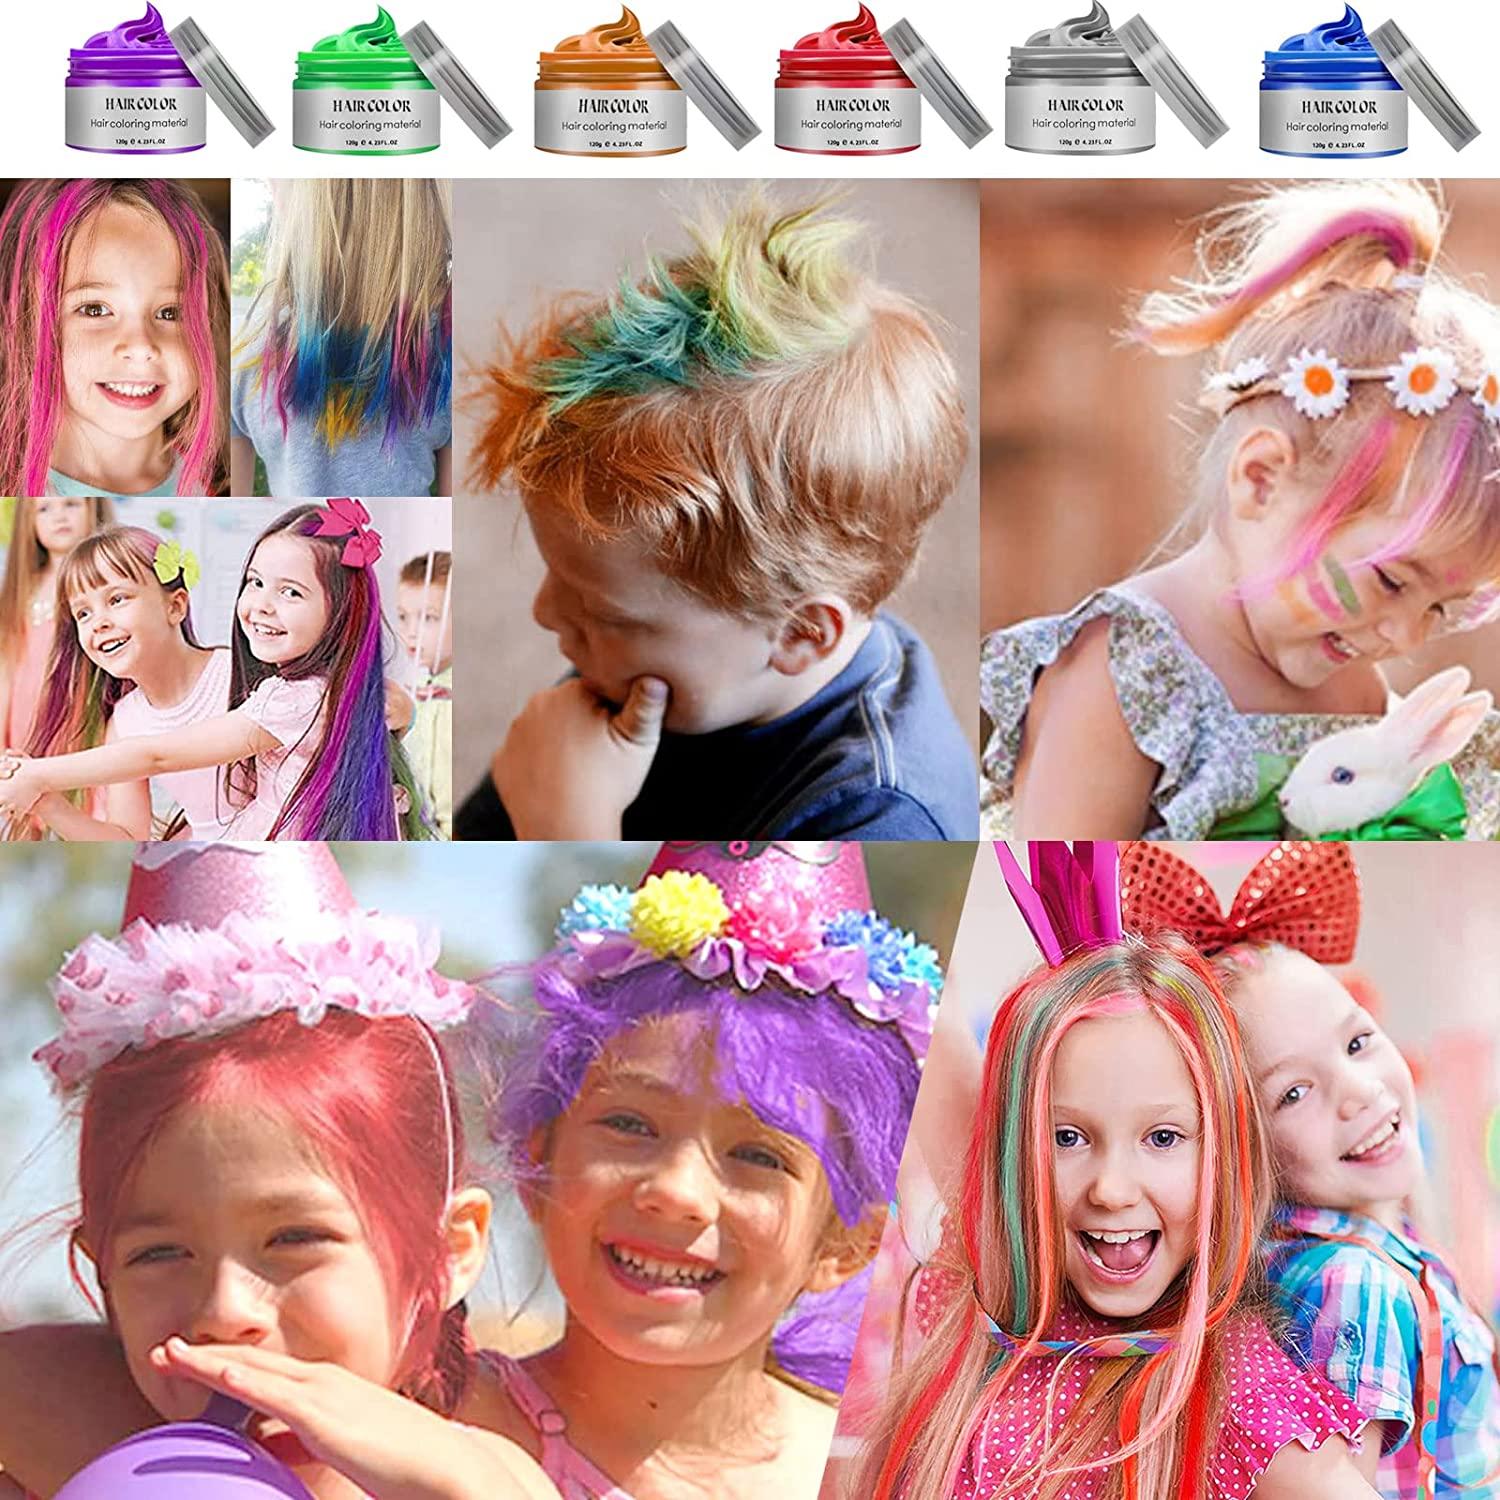 Temporary Hair Color Dye for Girls Kids, Hair Wax Color Girl Toys Gifts for  Age 4 5 6 7 8 9 Birthday,Party, Cosplay DIY, Children's Day, Halloween,  Christmas (6 colors)